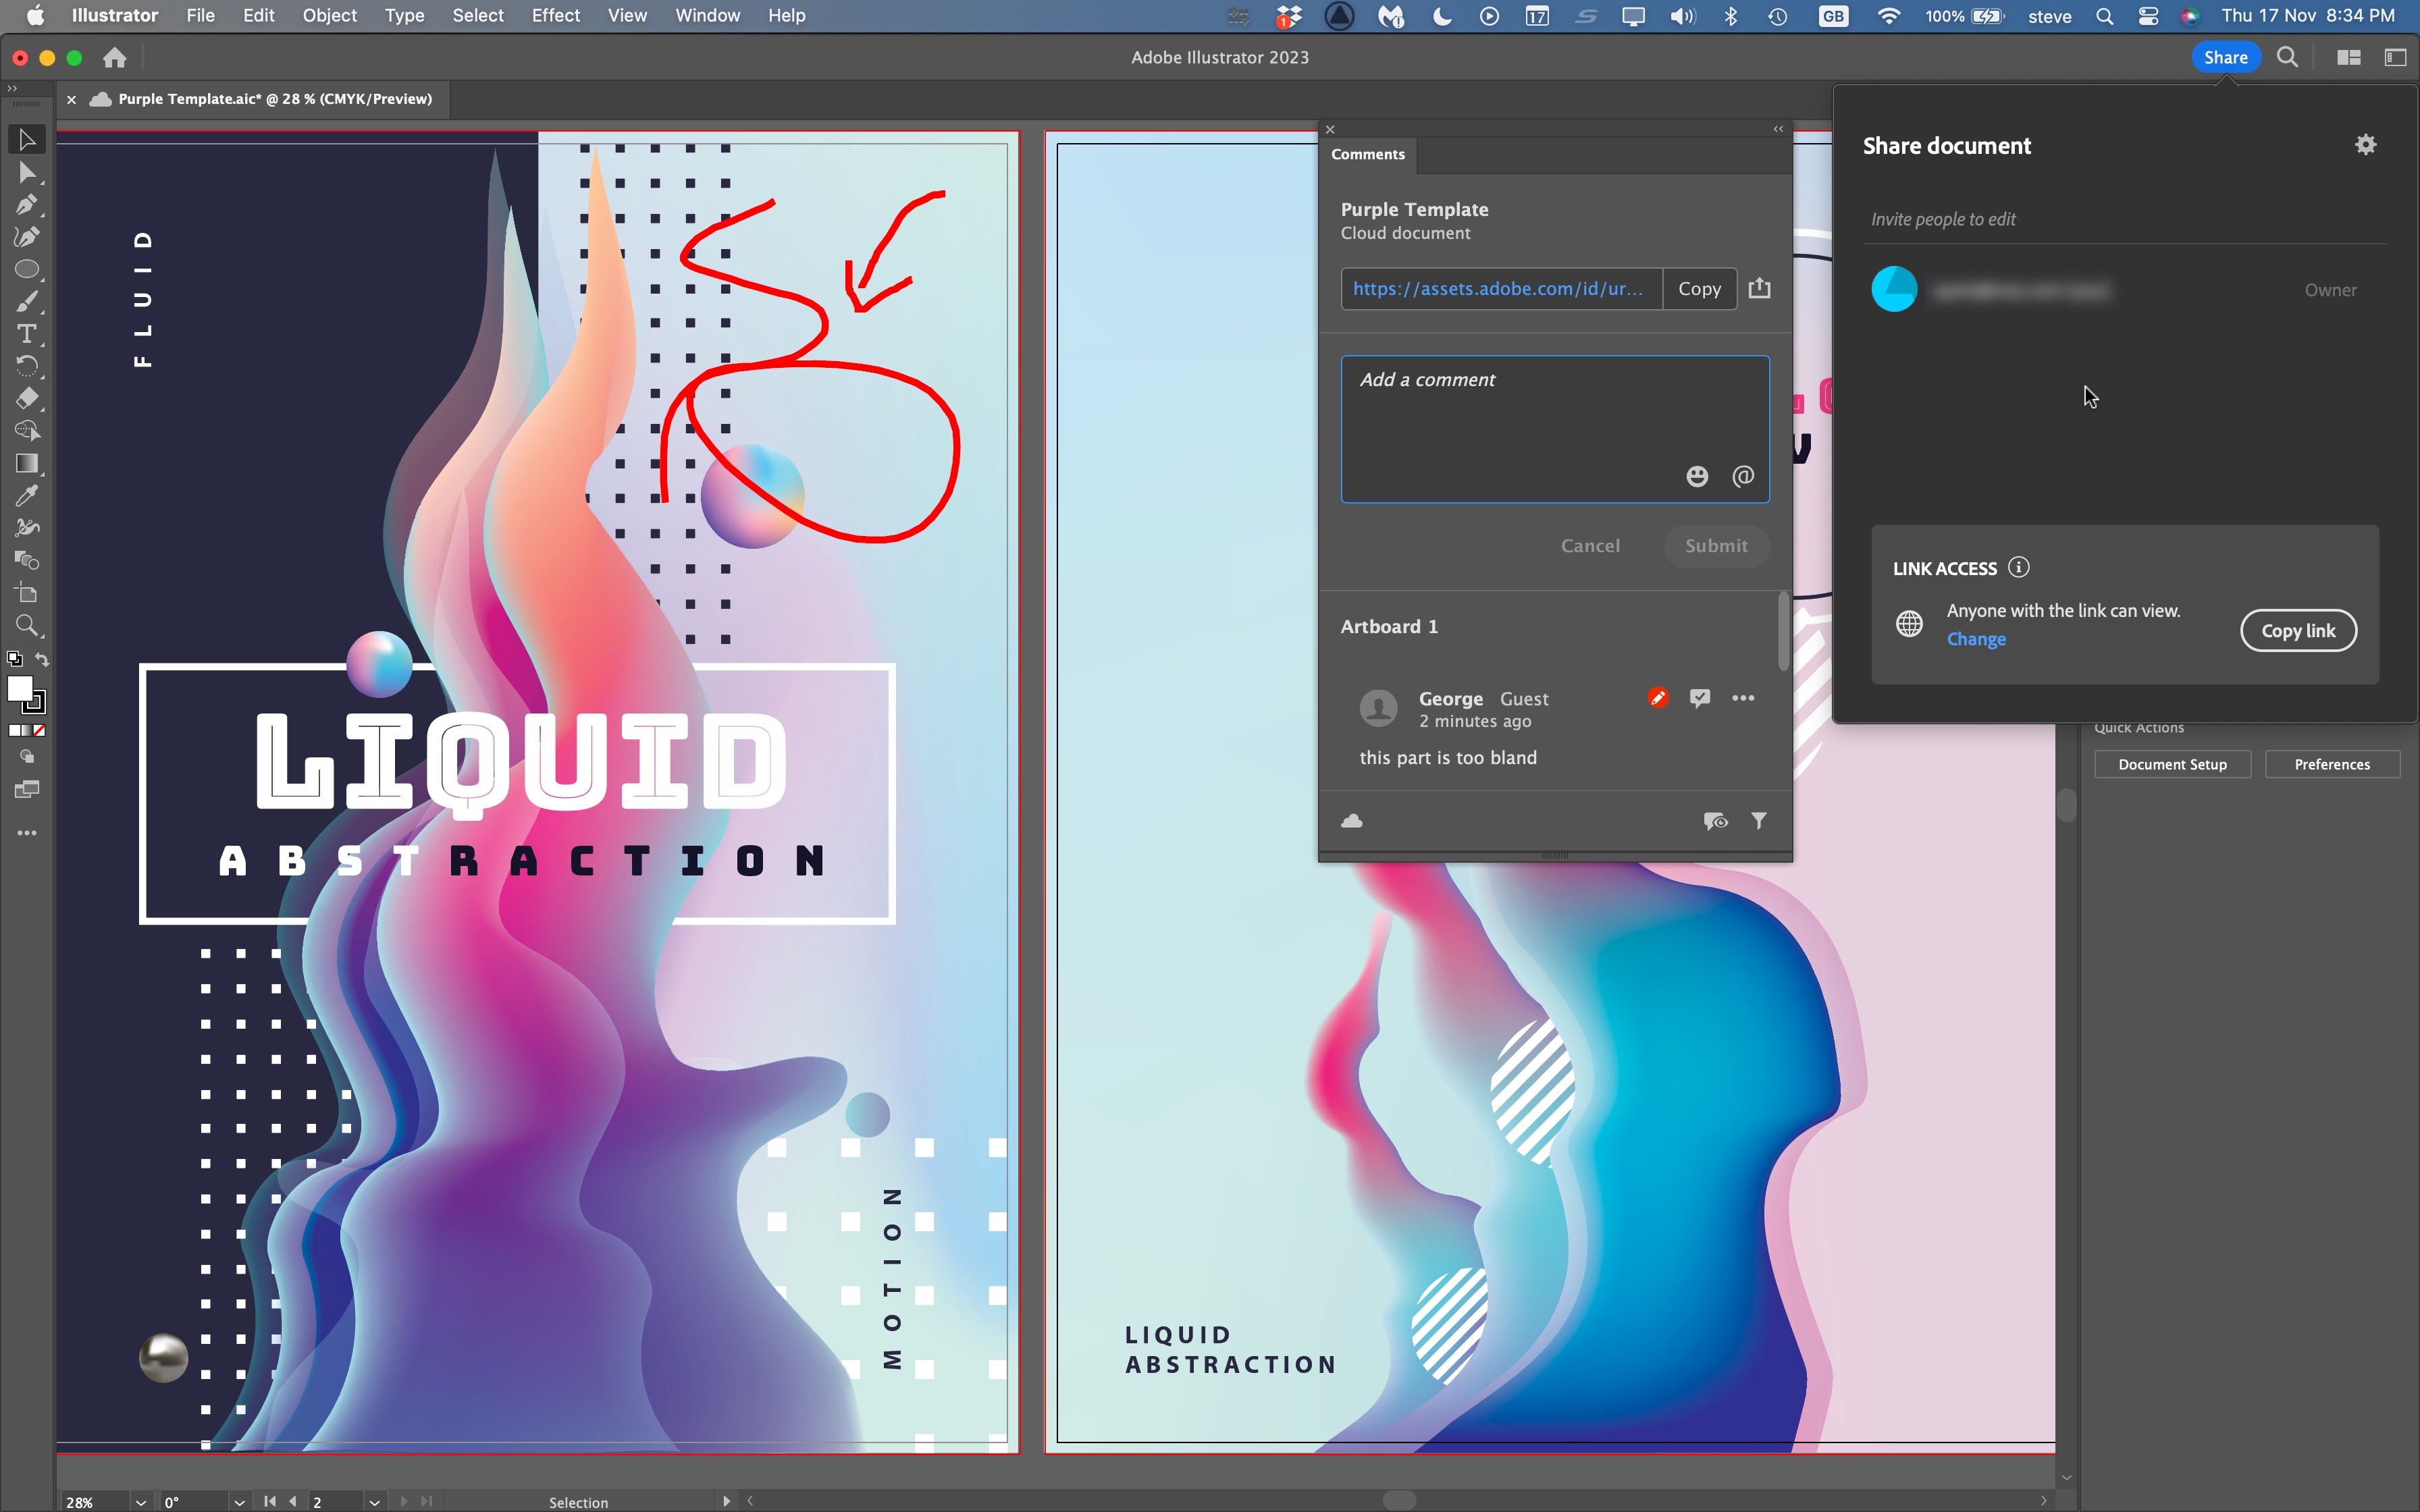 Adobe Illustrator graphic design software is in action